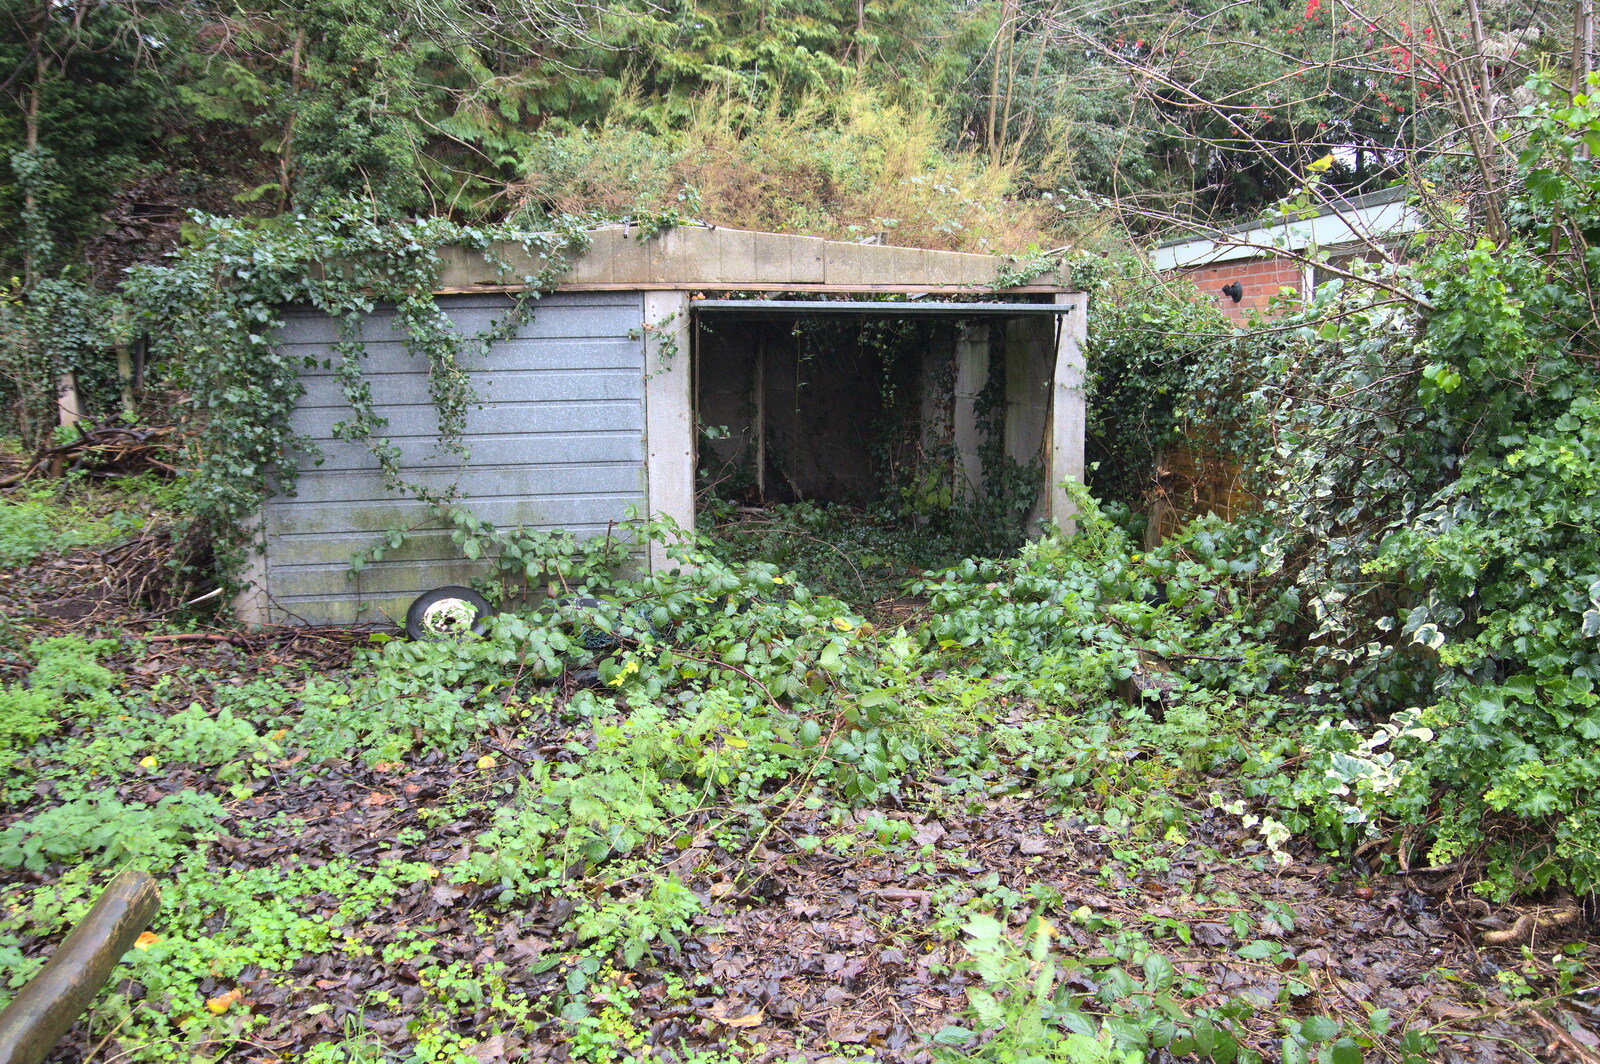 A derelict garage from New Year's Day, Brome, Suffolk - 1st January 2022